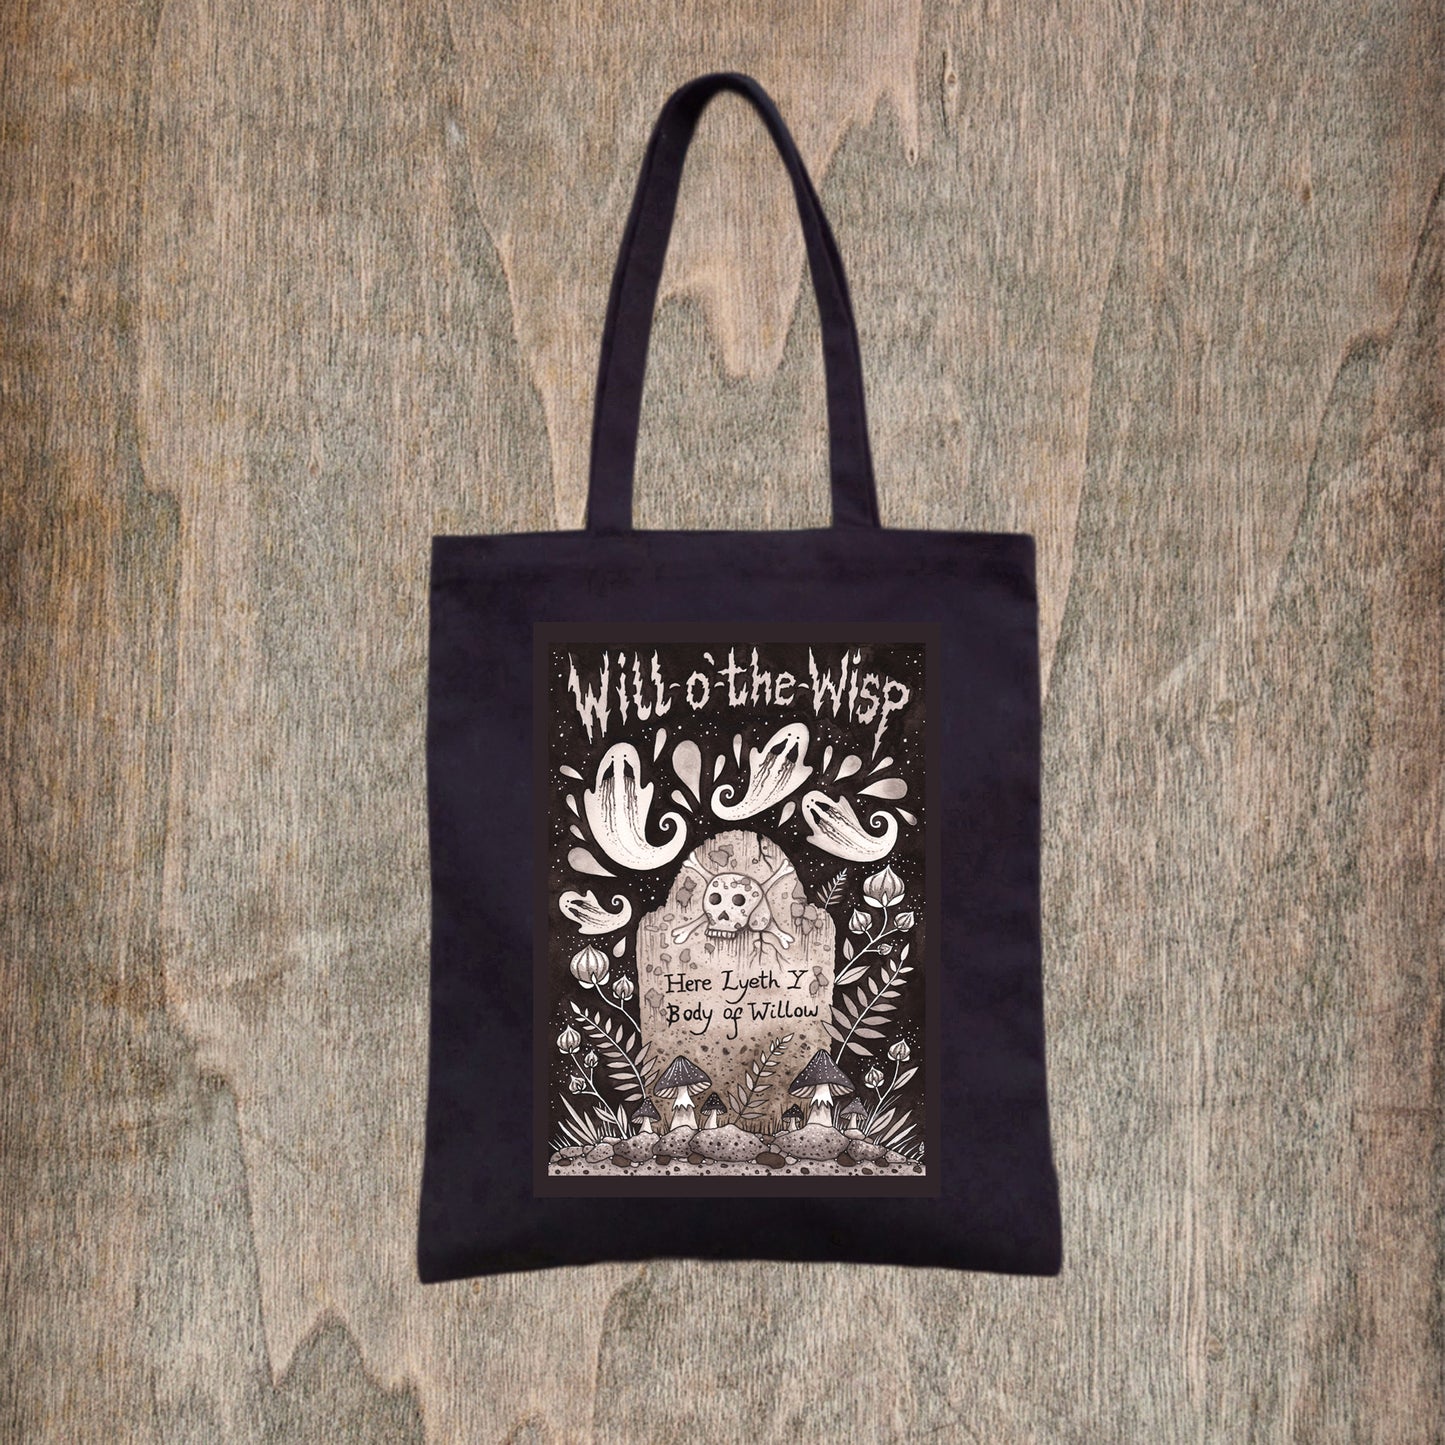 Will-o'-the-Wisp Tote Bag - Spooky Halloween Samhain Graveyard Ghosts Bag - Trick Or Treat All Hallows' Eve Grocery Shopping Bag